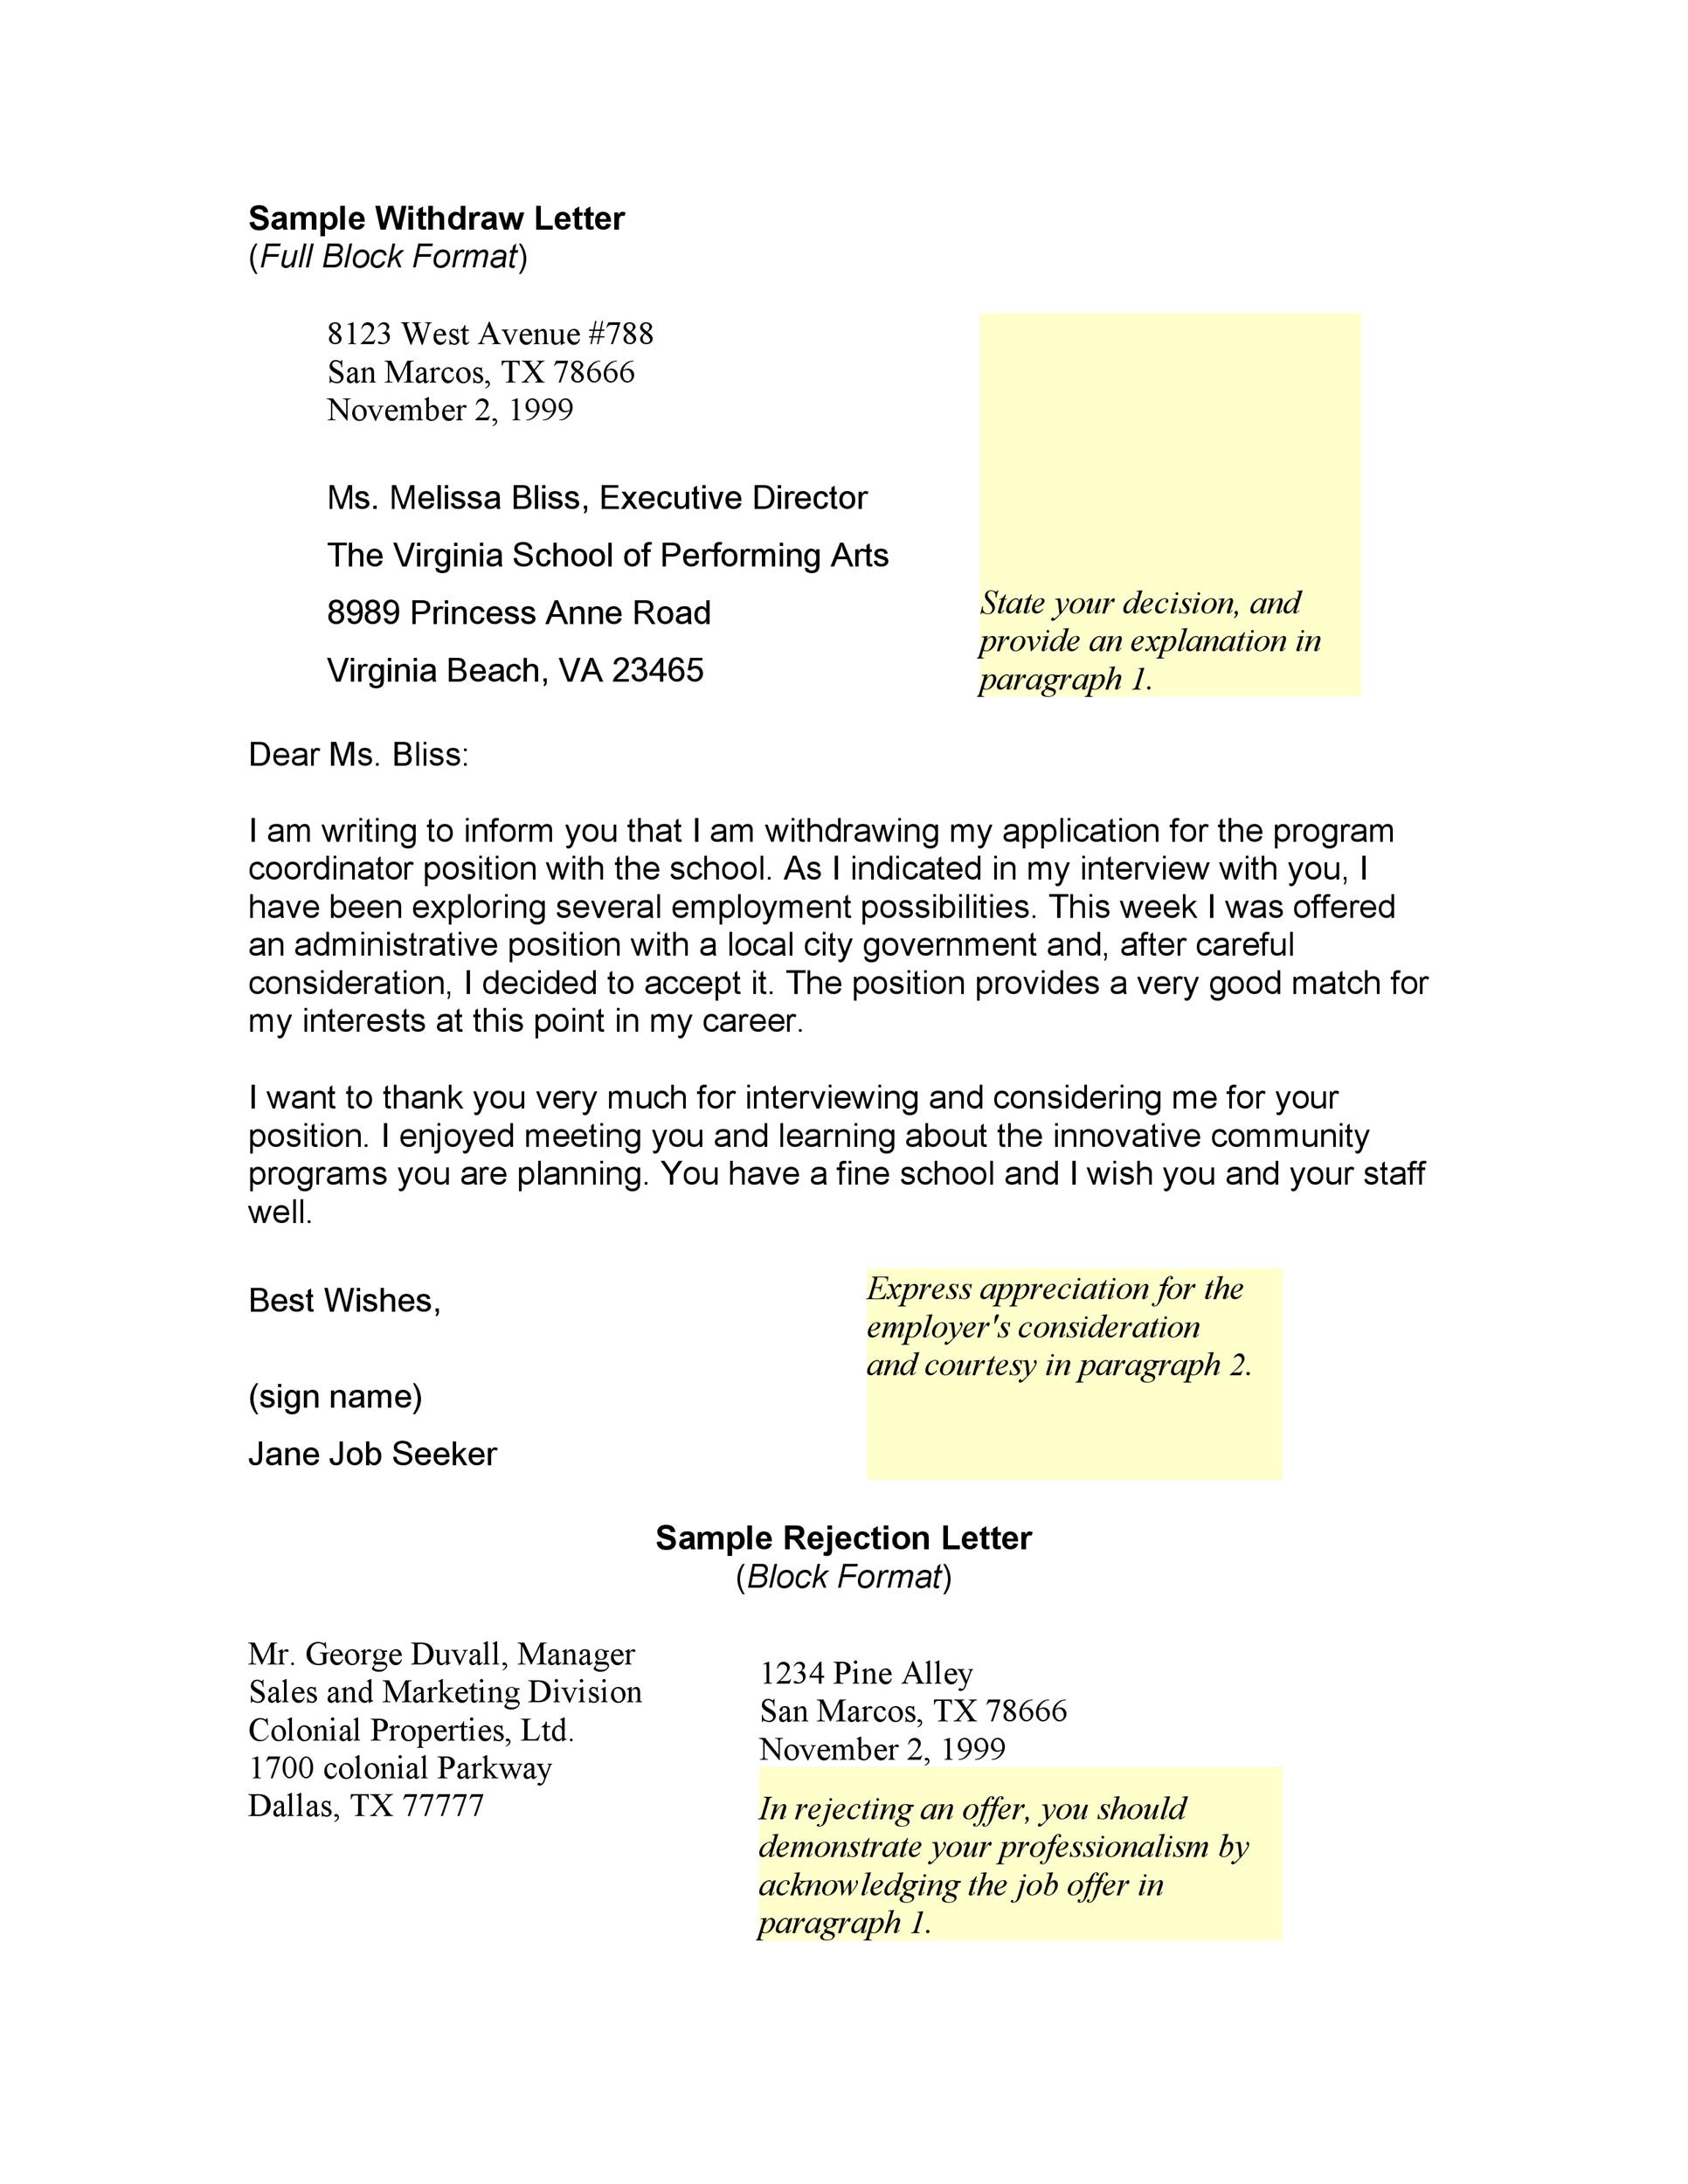 Sap Appeal Letter Format from templatelab.com